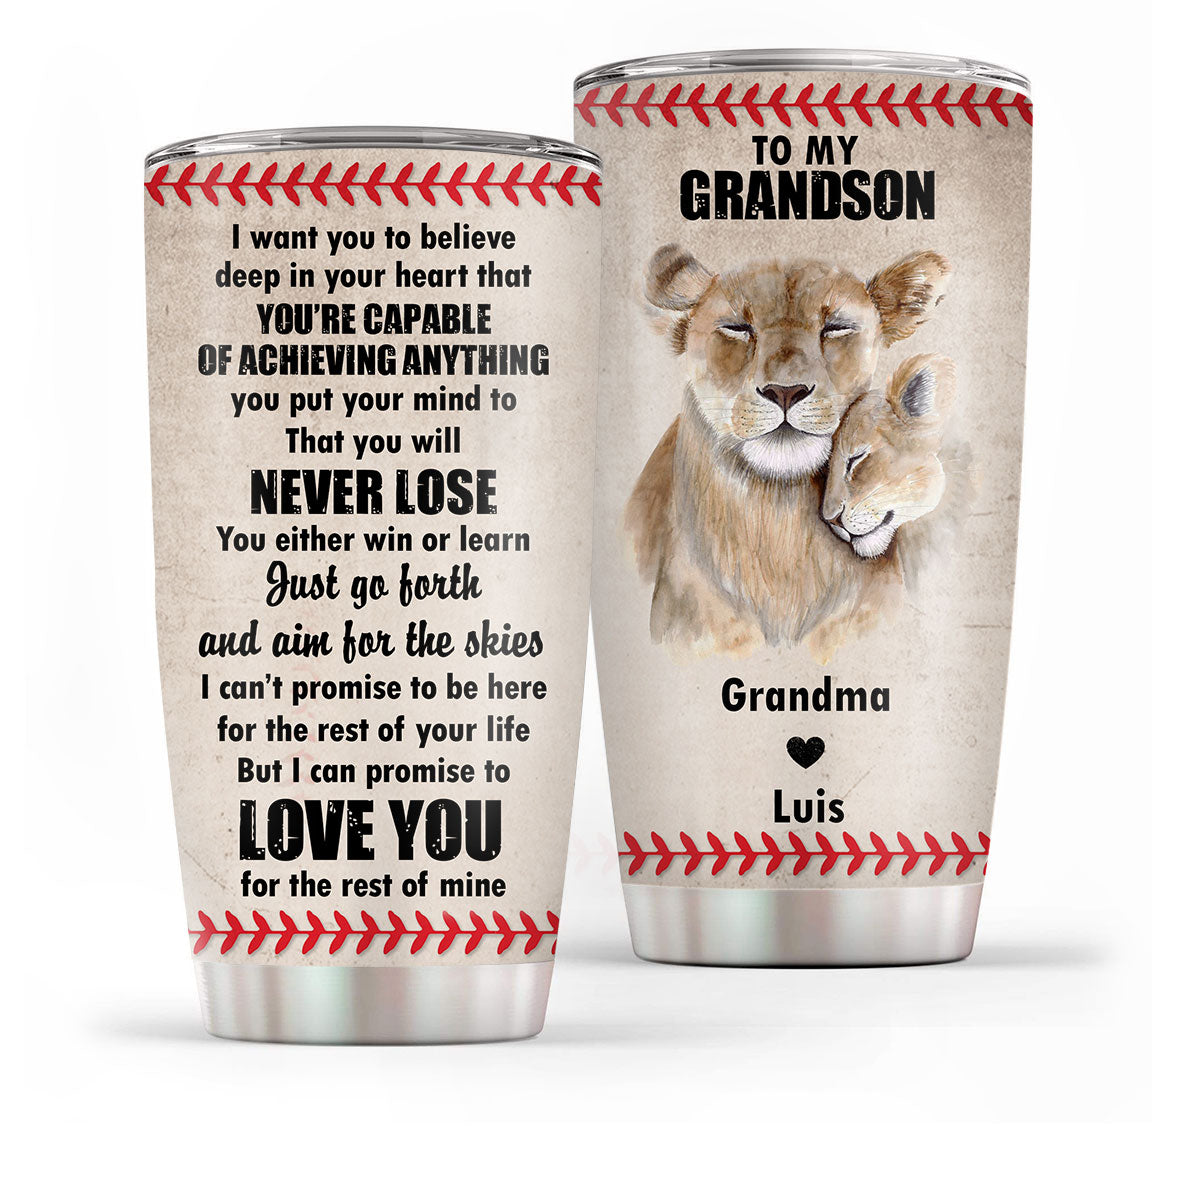 You’re Capable Of Achieving Anything - Personalized Stainless Steel Tumbler 20oz For Grandchildren NUHN221